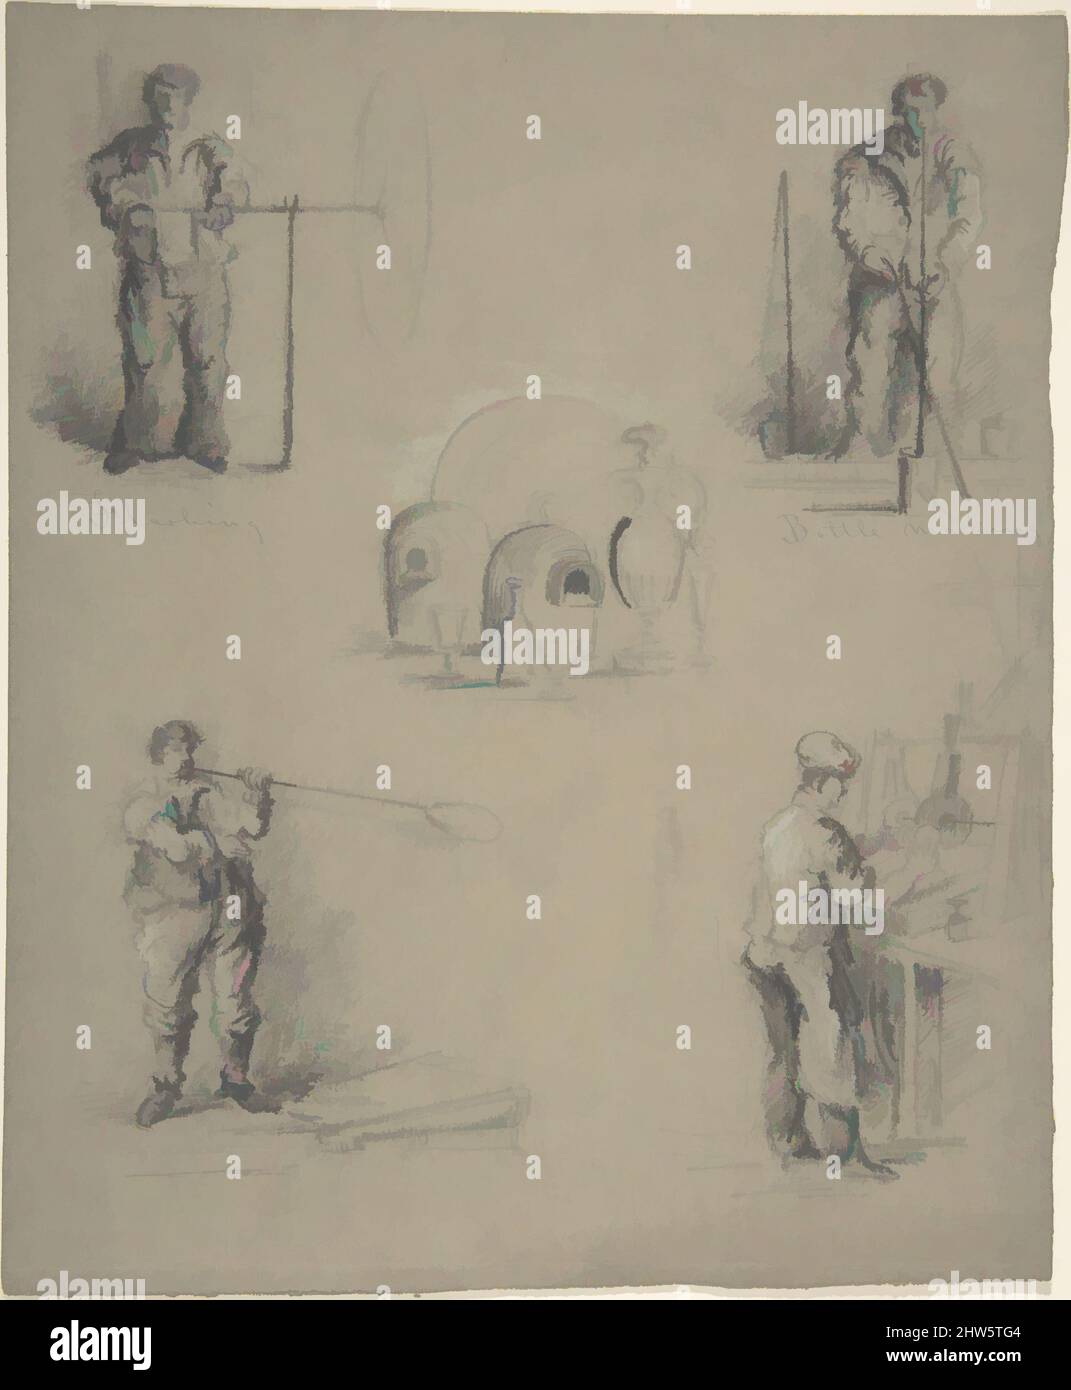 Art inspired by Five images showing the processes of manufacturing glass, 19th century, Graphite, white chalk and ink on gray paper, sheet: 9 1/8 x 7 1/2 in. (23.2 x 19.1 cm), Drawings, Anonymous, British, 19th century, Classic works modernized by Artotop with a splash of modernity. Shapes, color and value, eye-catching visual impact on art. Emotions through freedom of artworks in a contemporary way. A timeless message pursuing a wildly creative new direction. Artists turning to the digital medium and creating the Artotop NFT Stock Photo